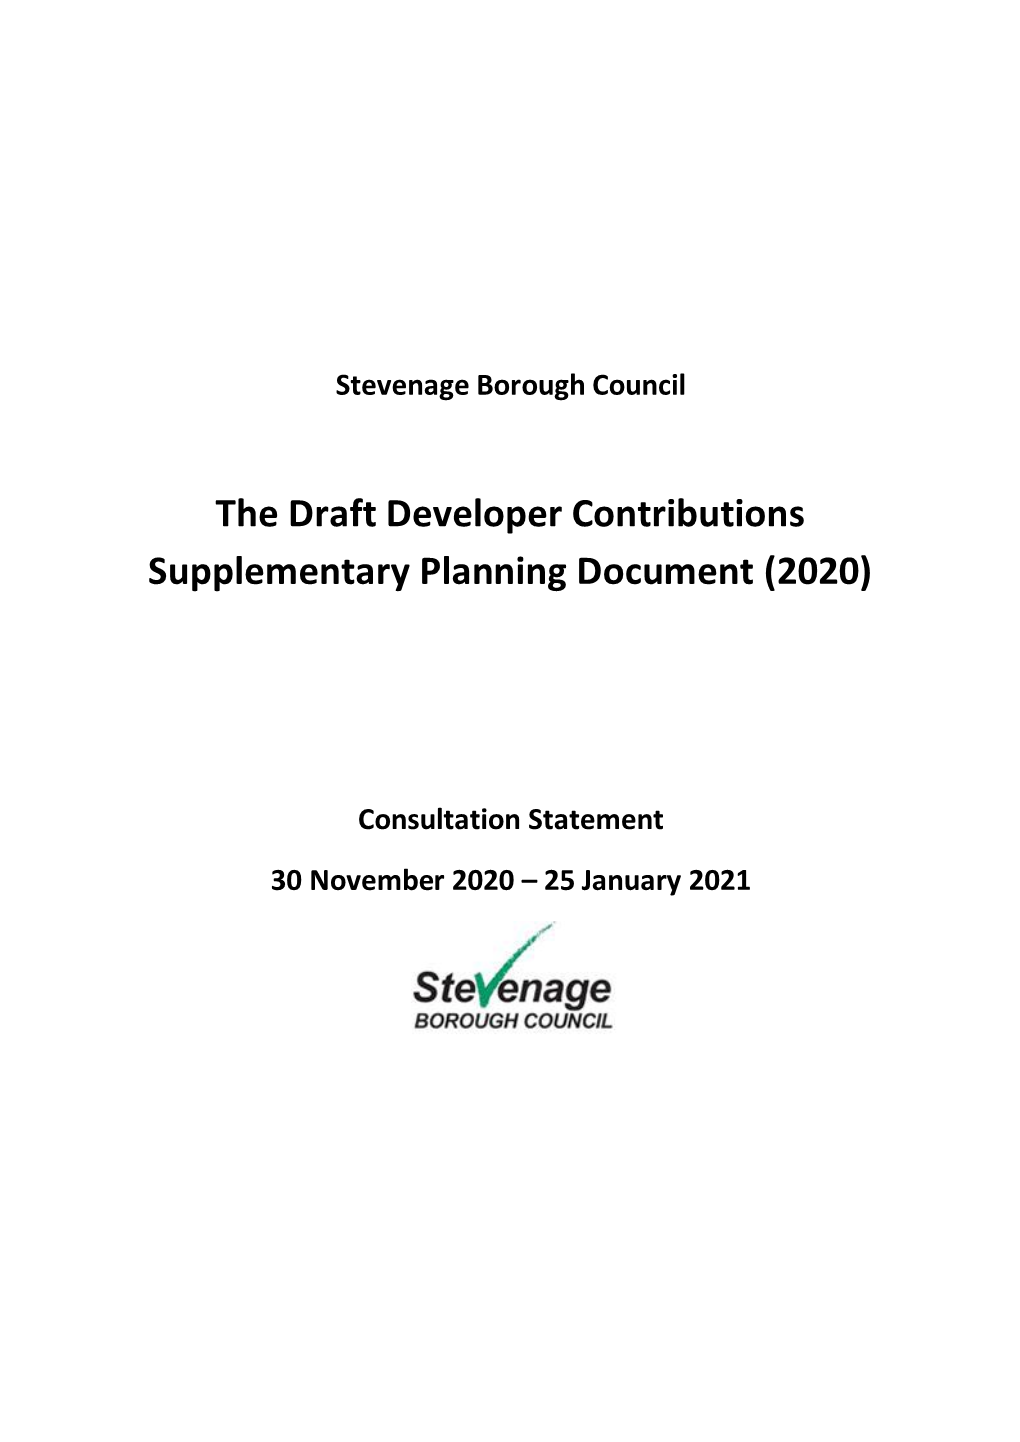 The Draft Developer Contributions Supplementary Planning Document (2020)